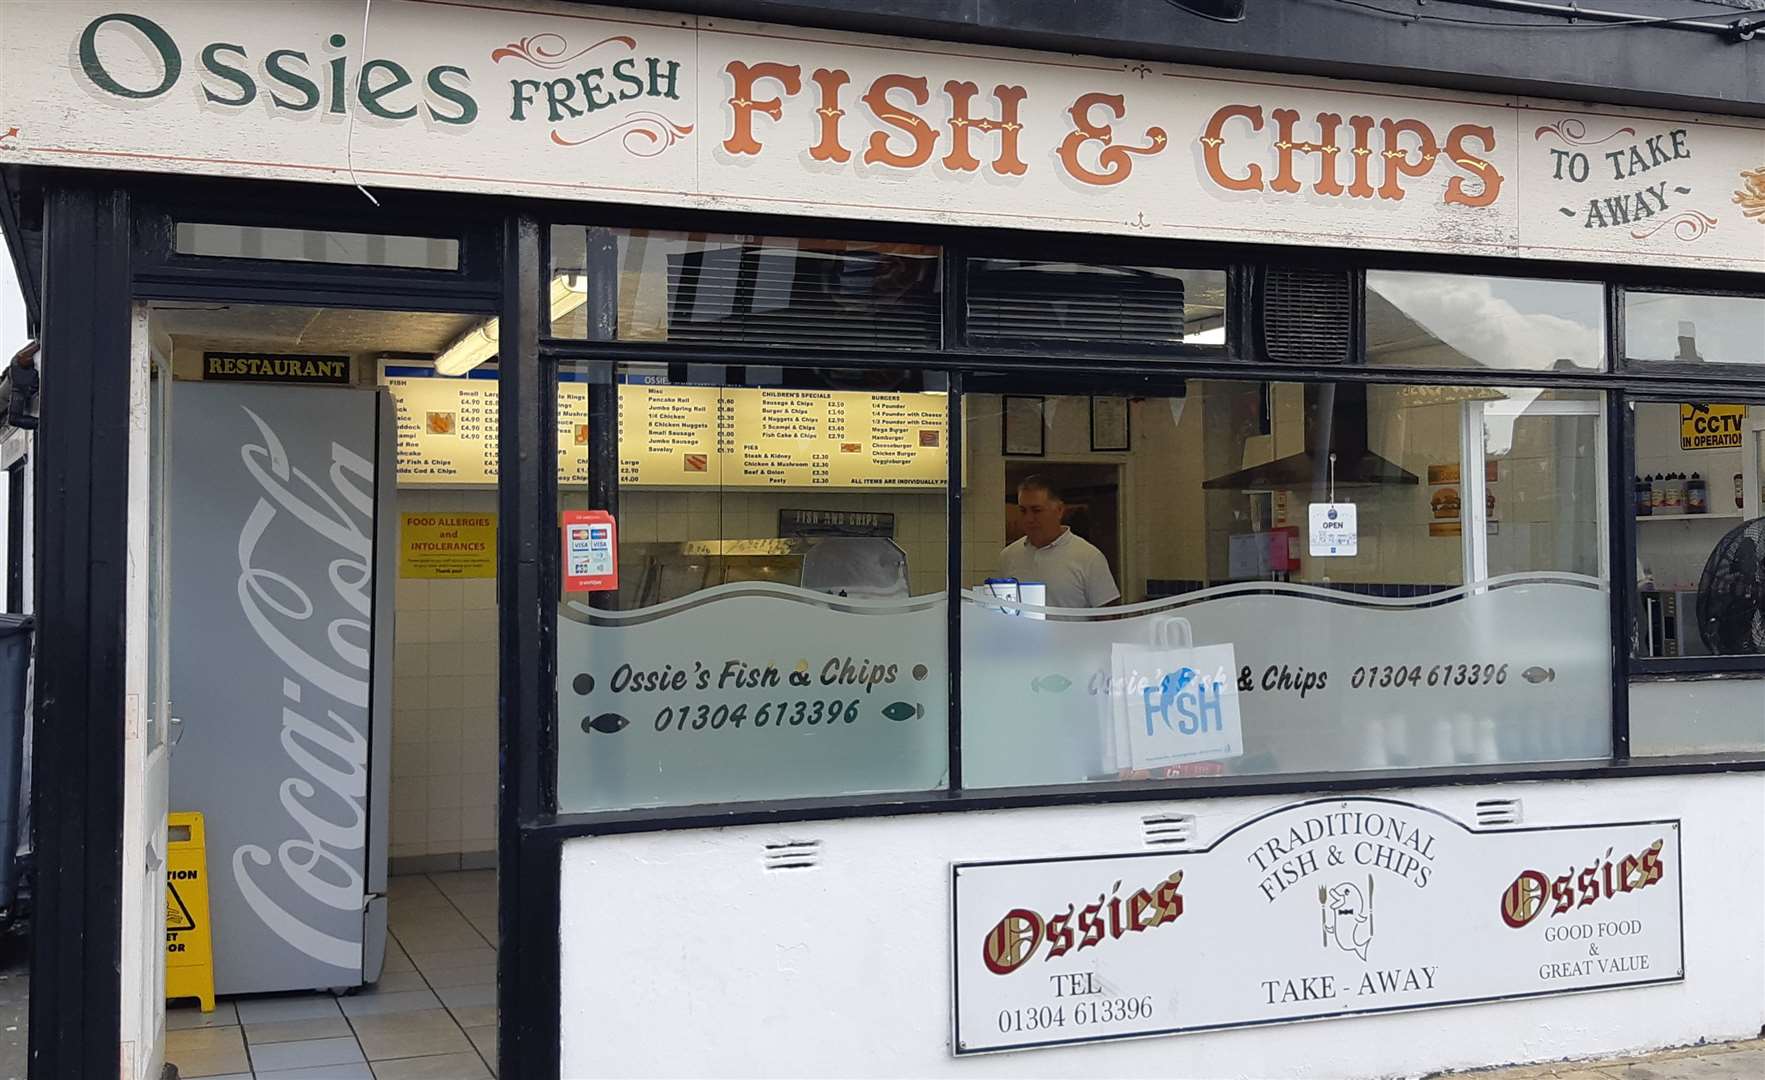 Ossie's Fish and Chip Shop was among the first to offer to help volunteers